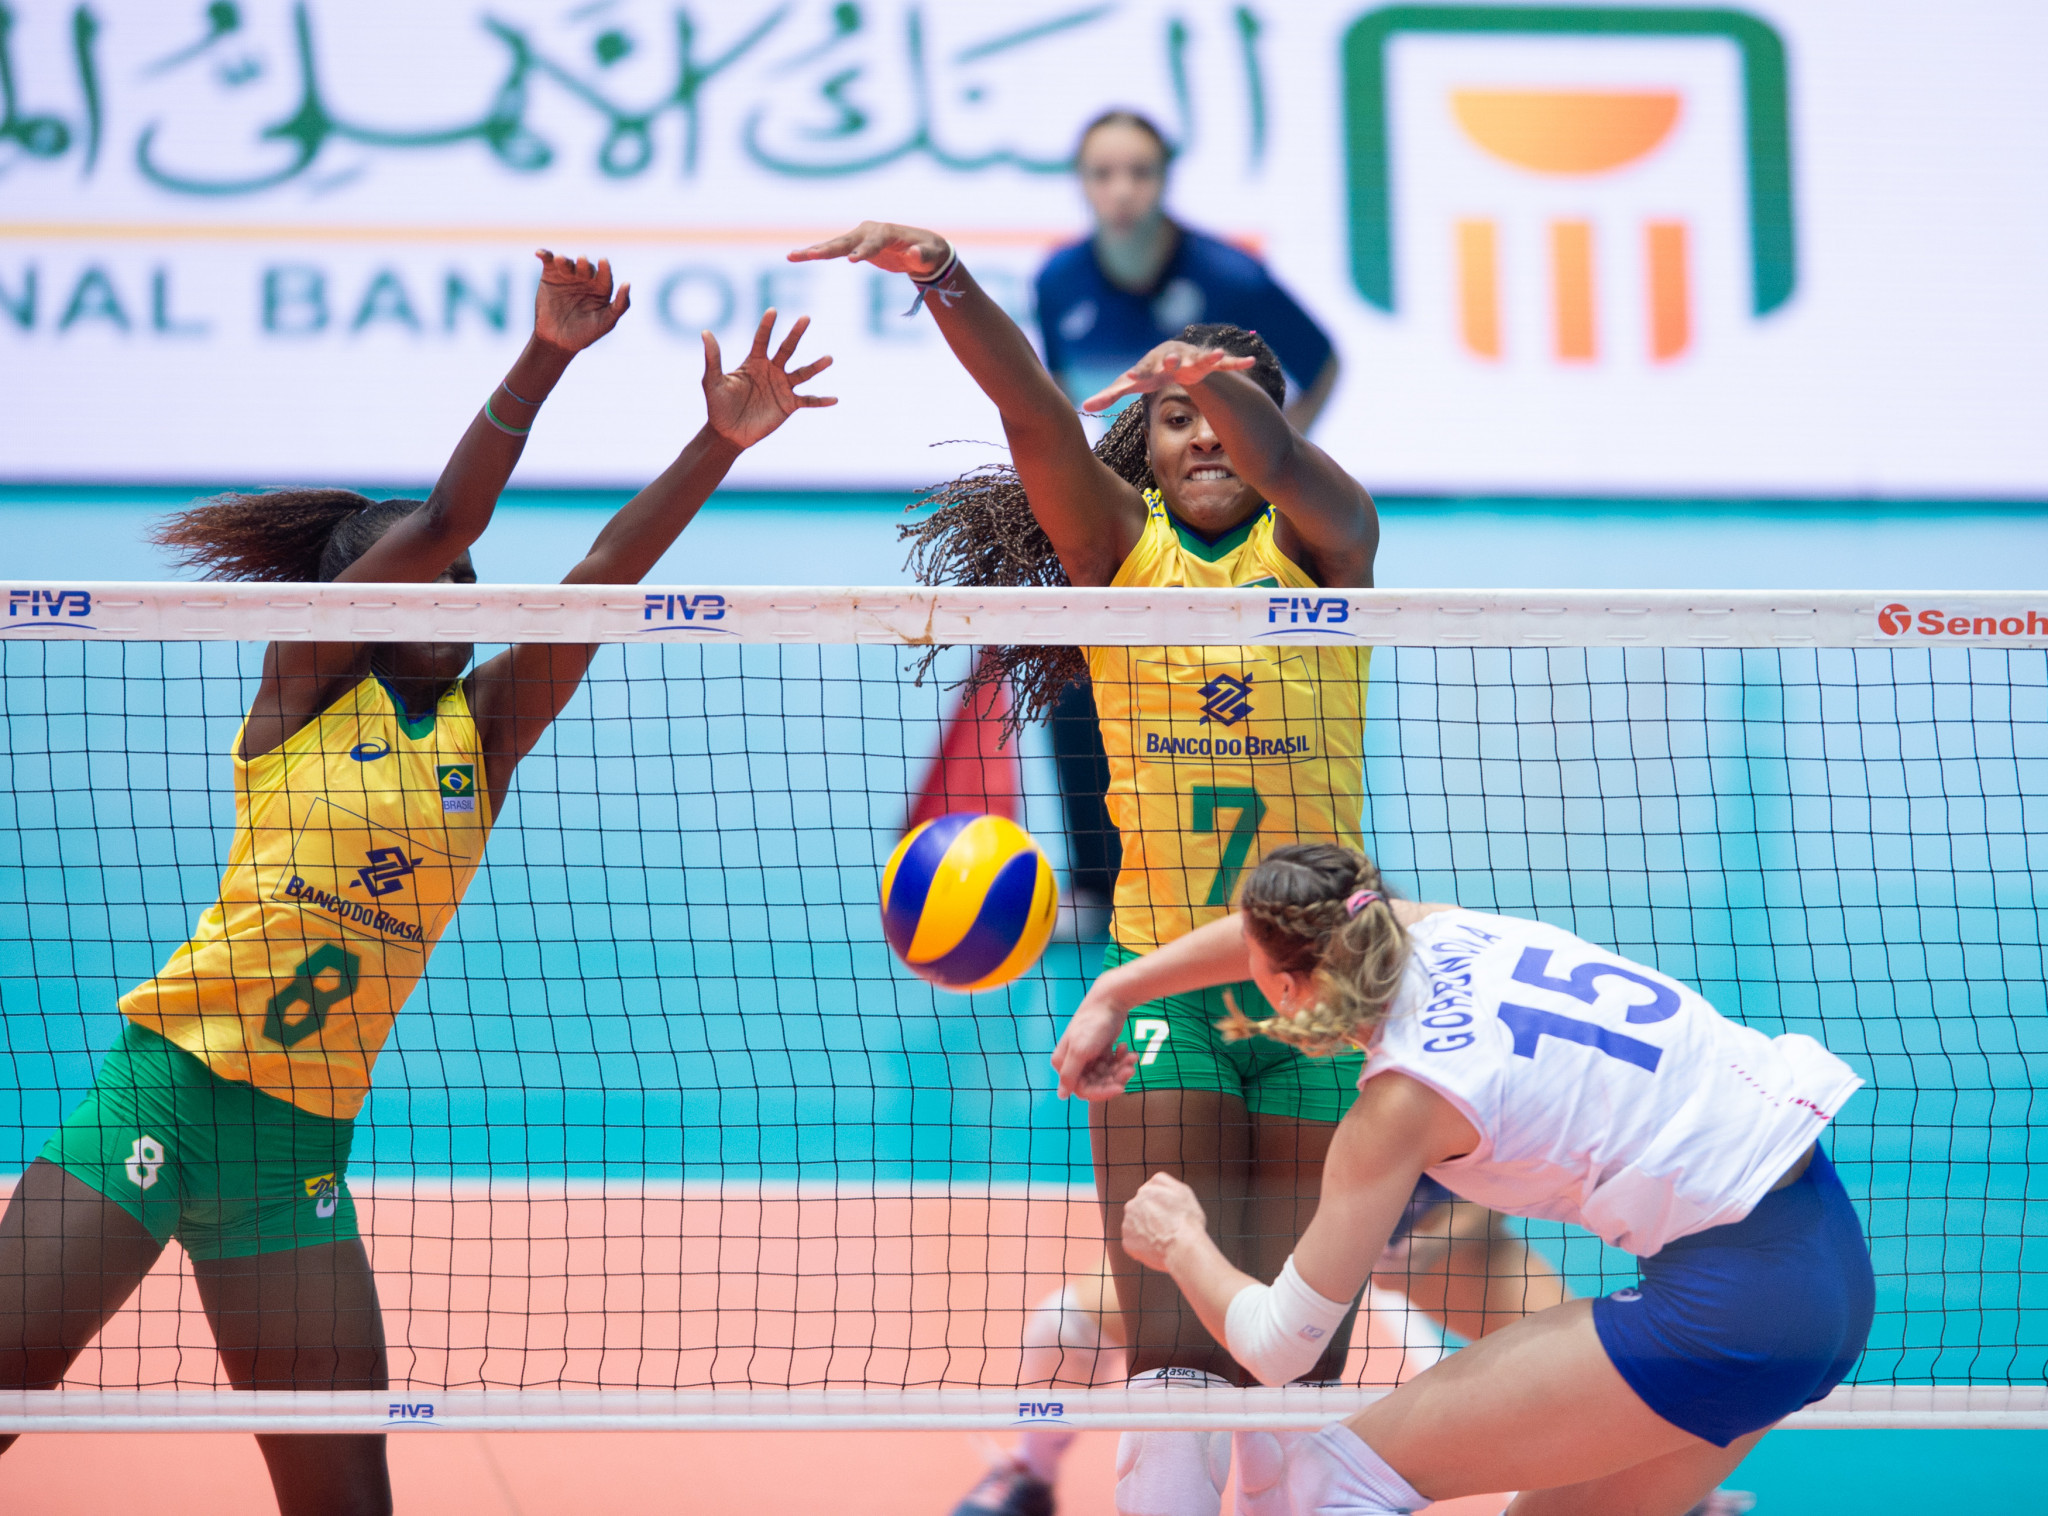 Brazil came from two sets down to beat Russia in their quarter-final ©FIVB